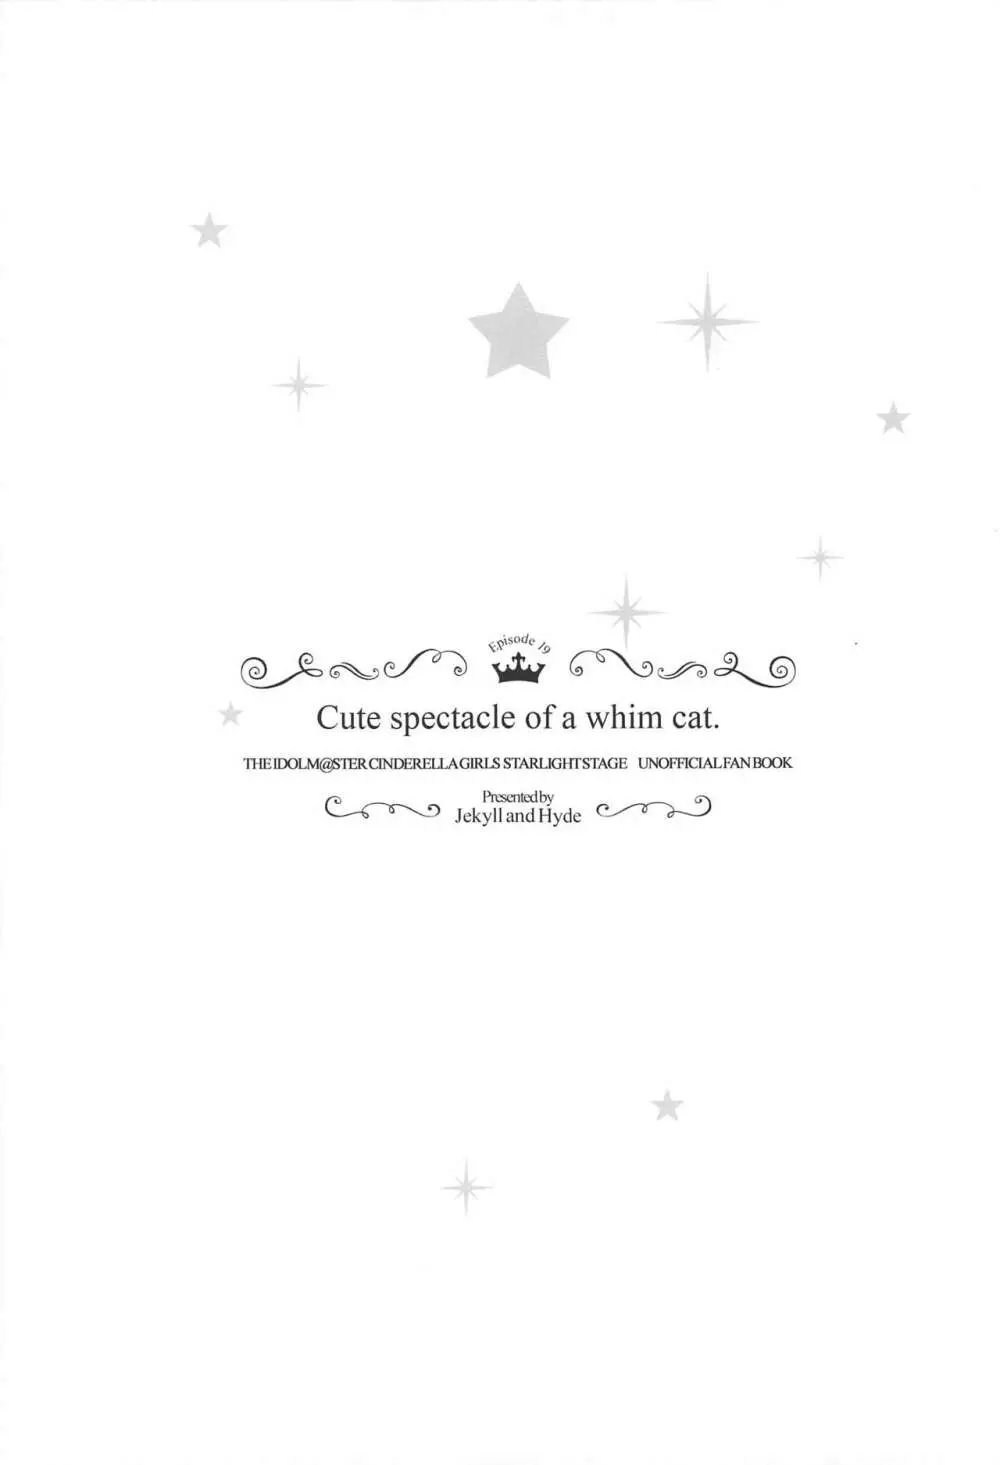 Cute spectacle of a whim cat. 24ページ